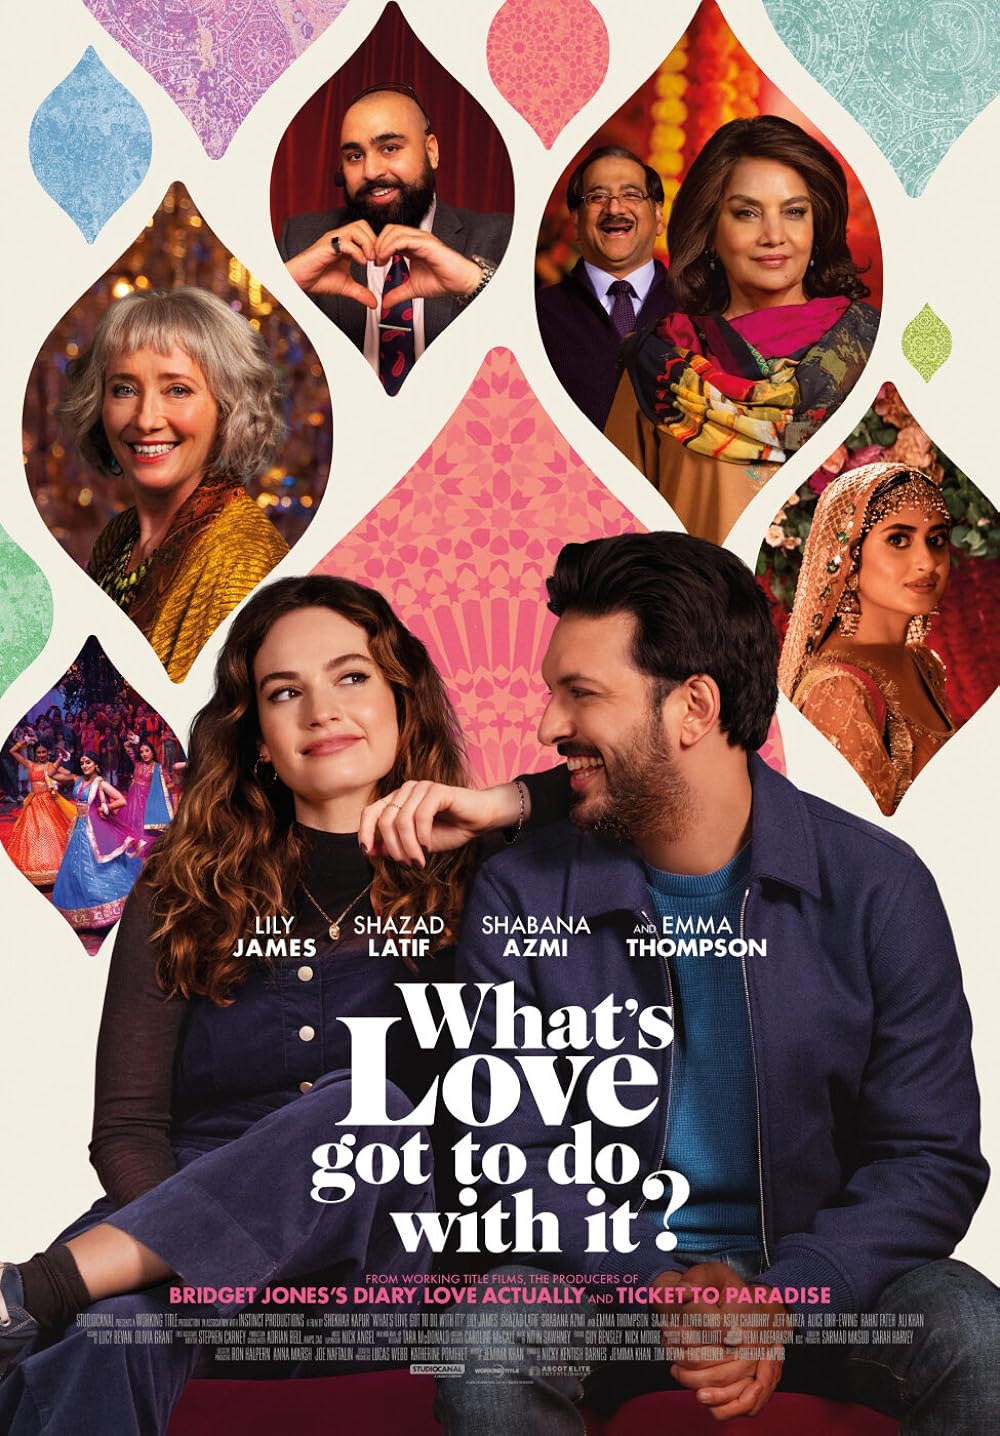 Cover Art for "What's Love Got To Do With It?"